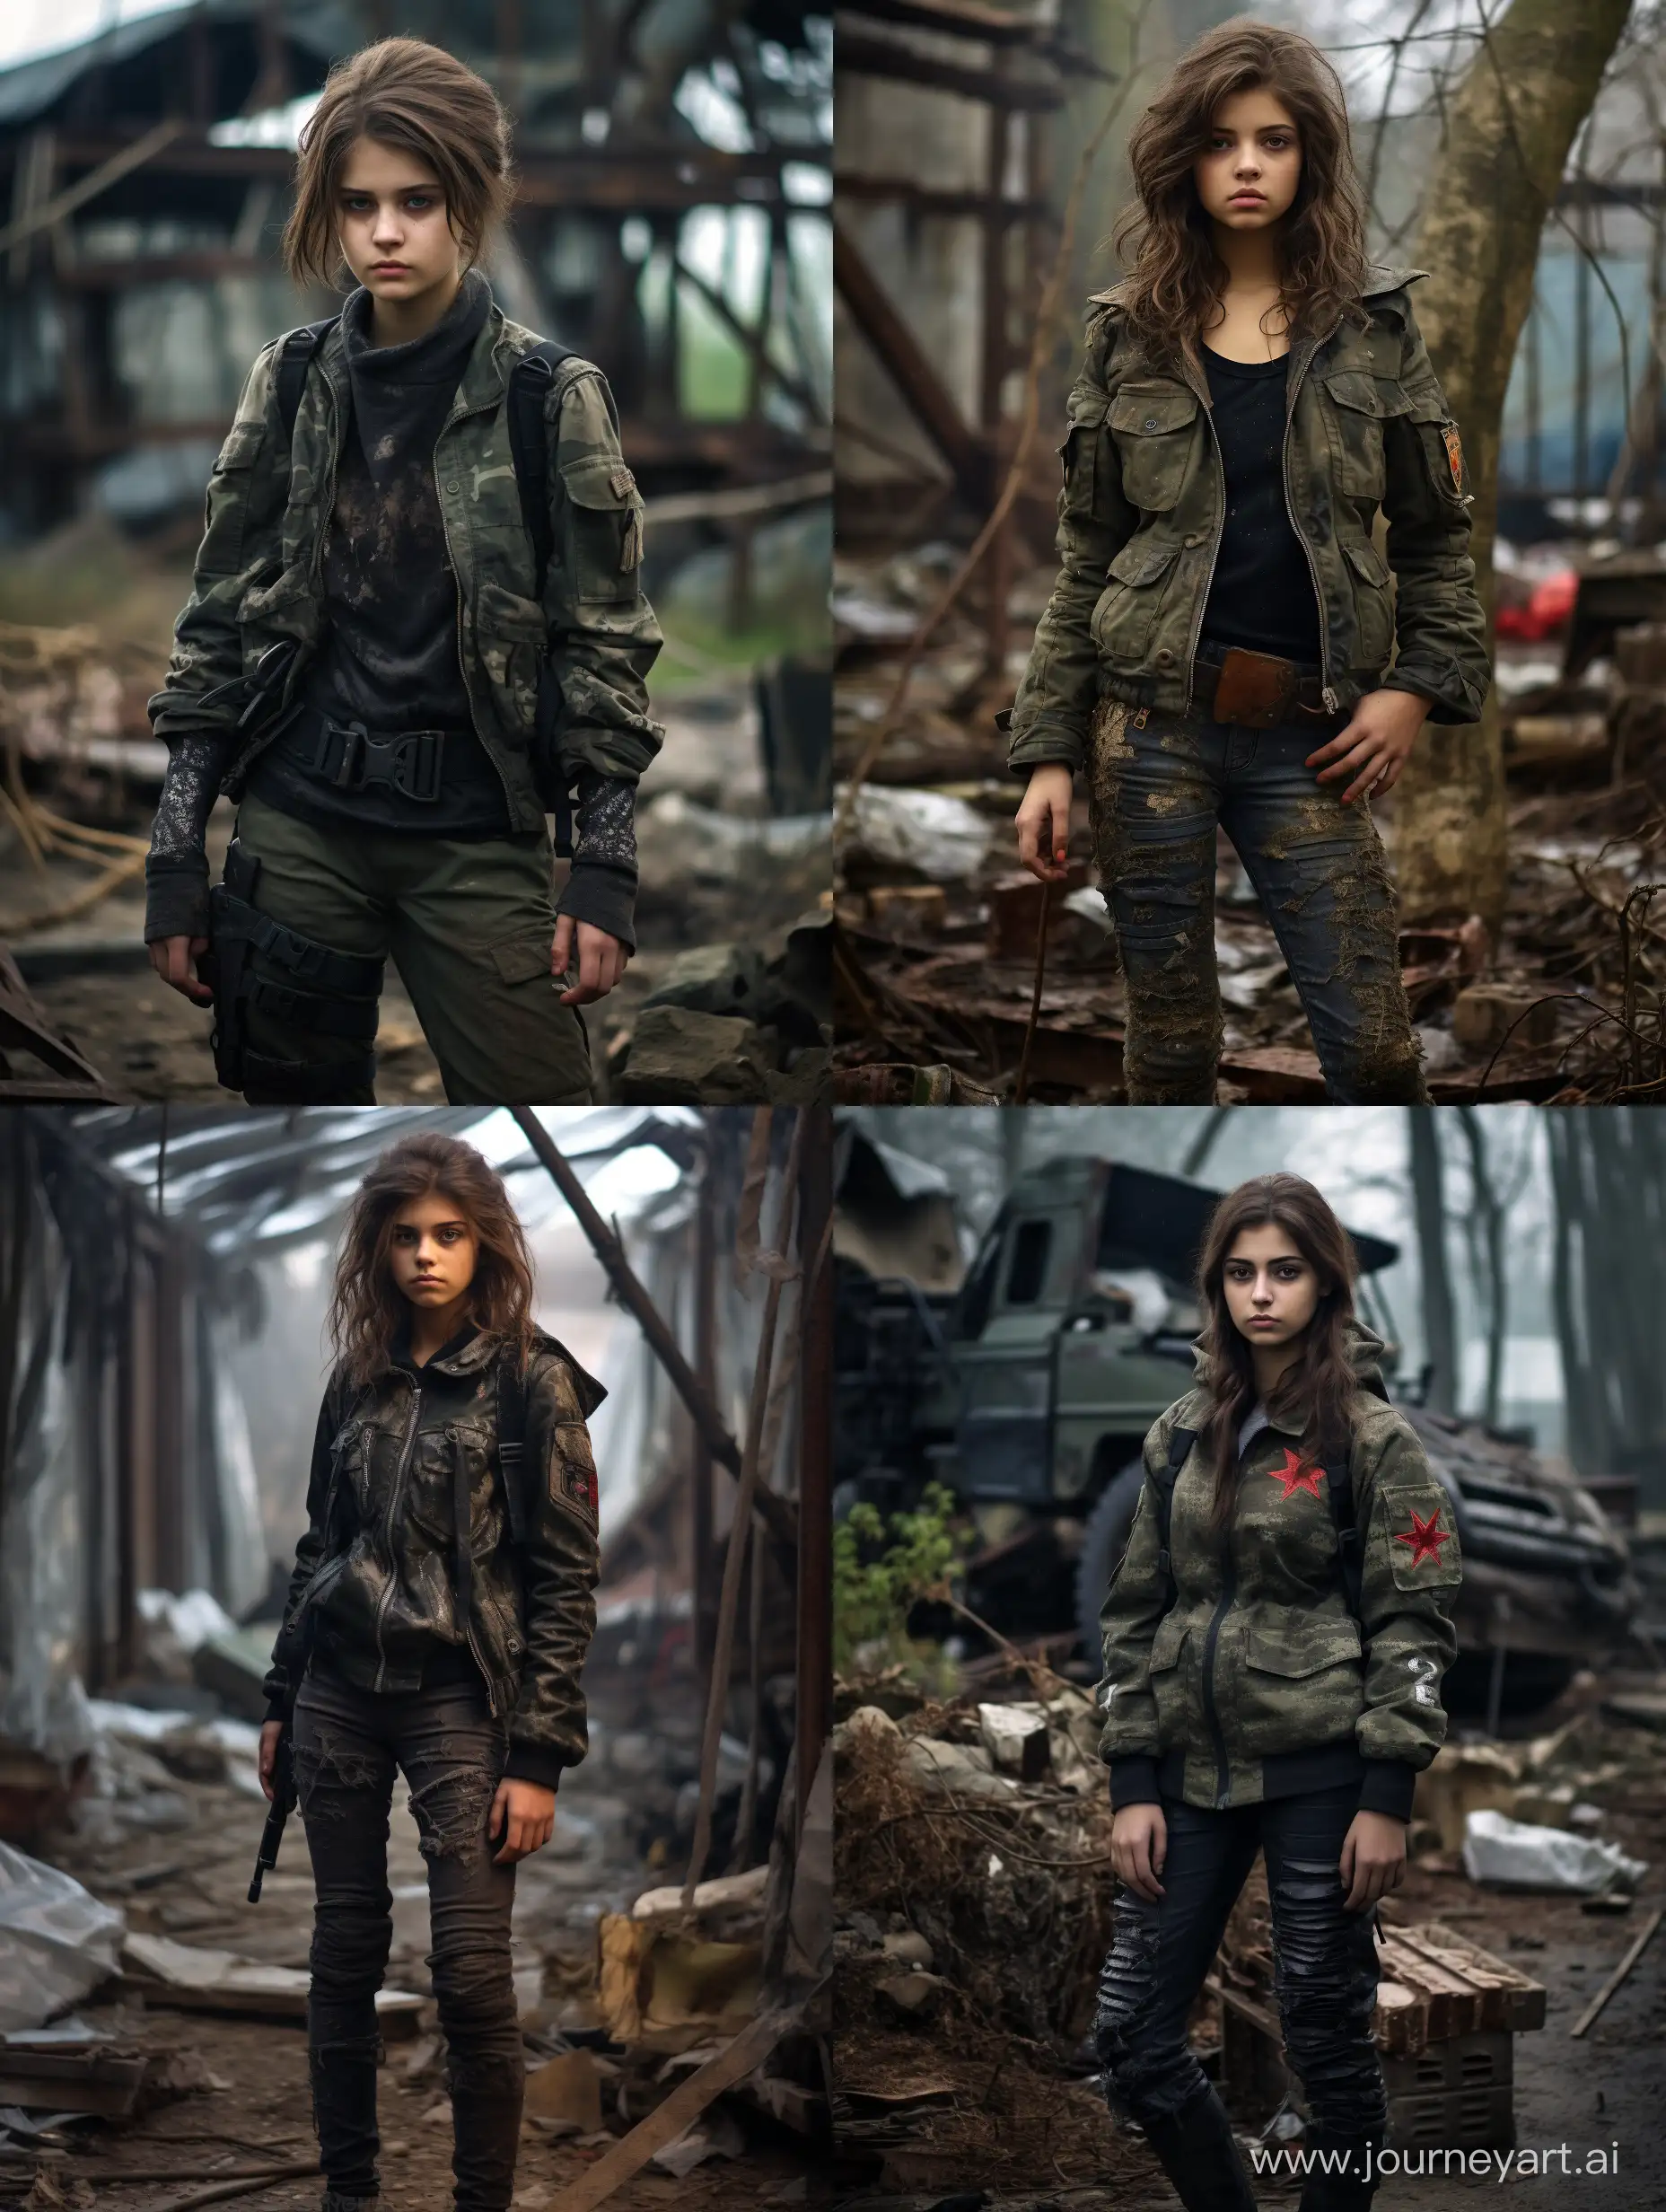 Post-Apocalypse, office, Communist winter military uniforms, кубинский революционер, tomboy in uniform, pretty 15 year old woman, tomboy, full body, military camouflage tight leggings, Photos 8K, modern military uniform, solo, without weapon